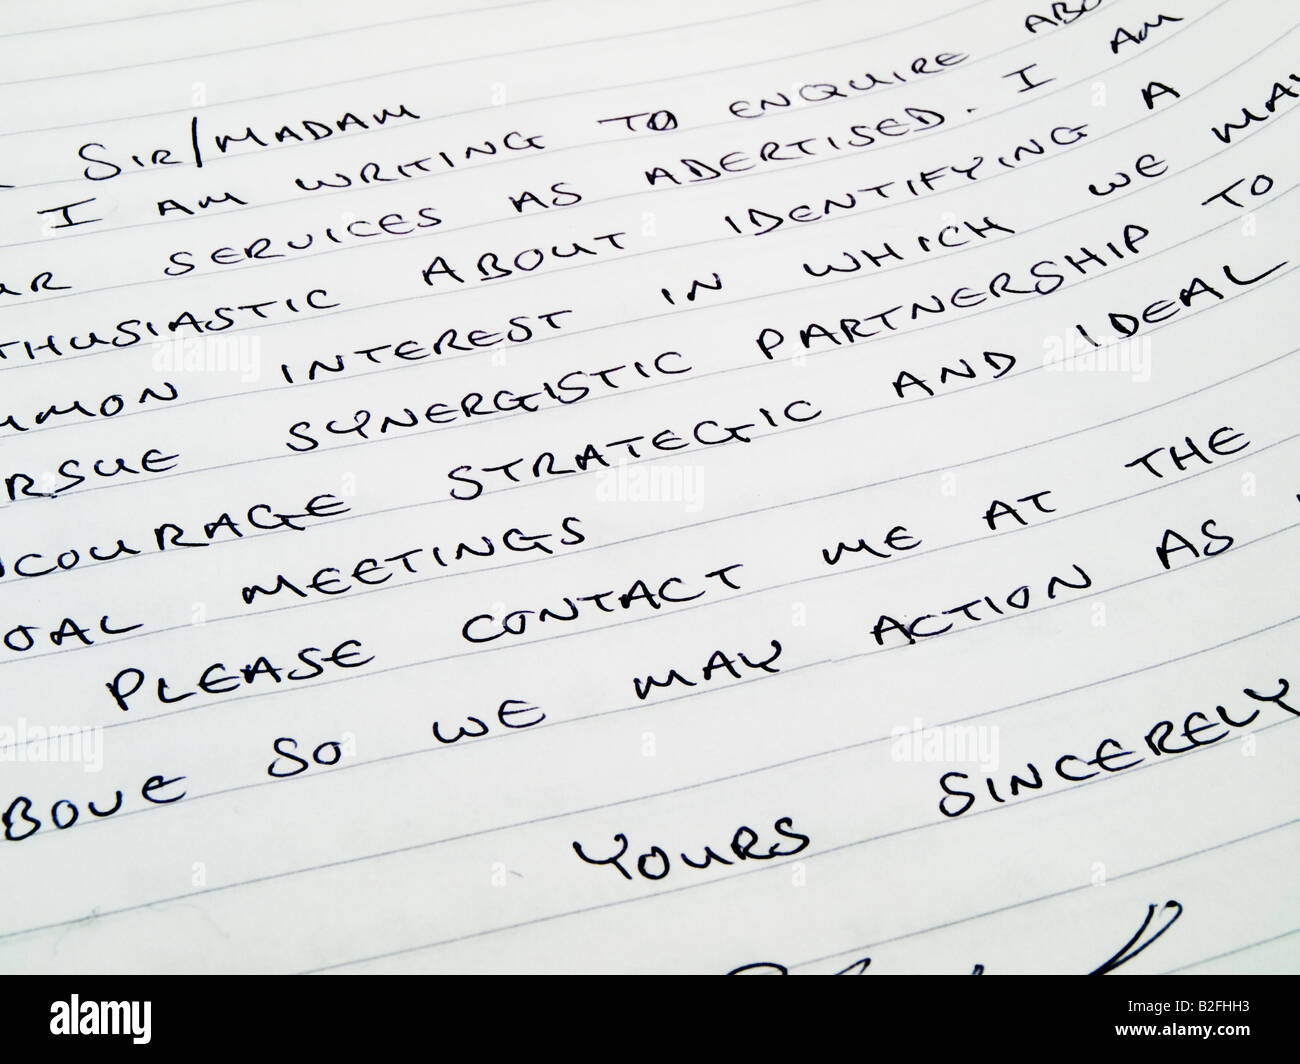 Page 22 - Old Handwritten Note High Resolution Stock Photography